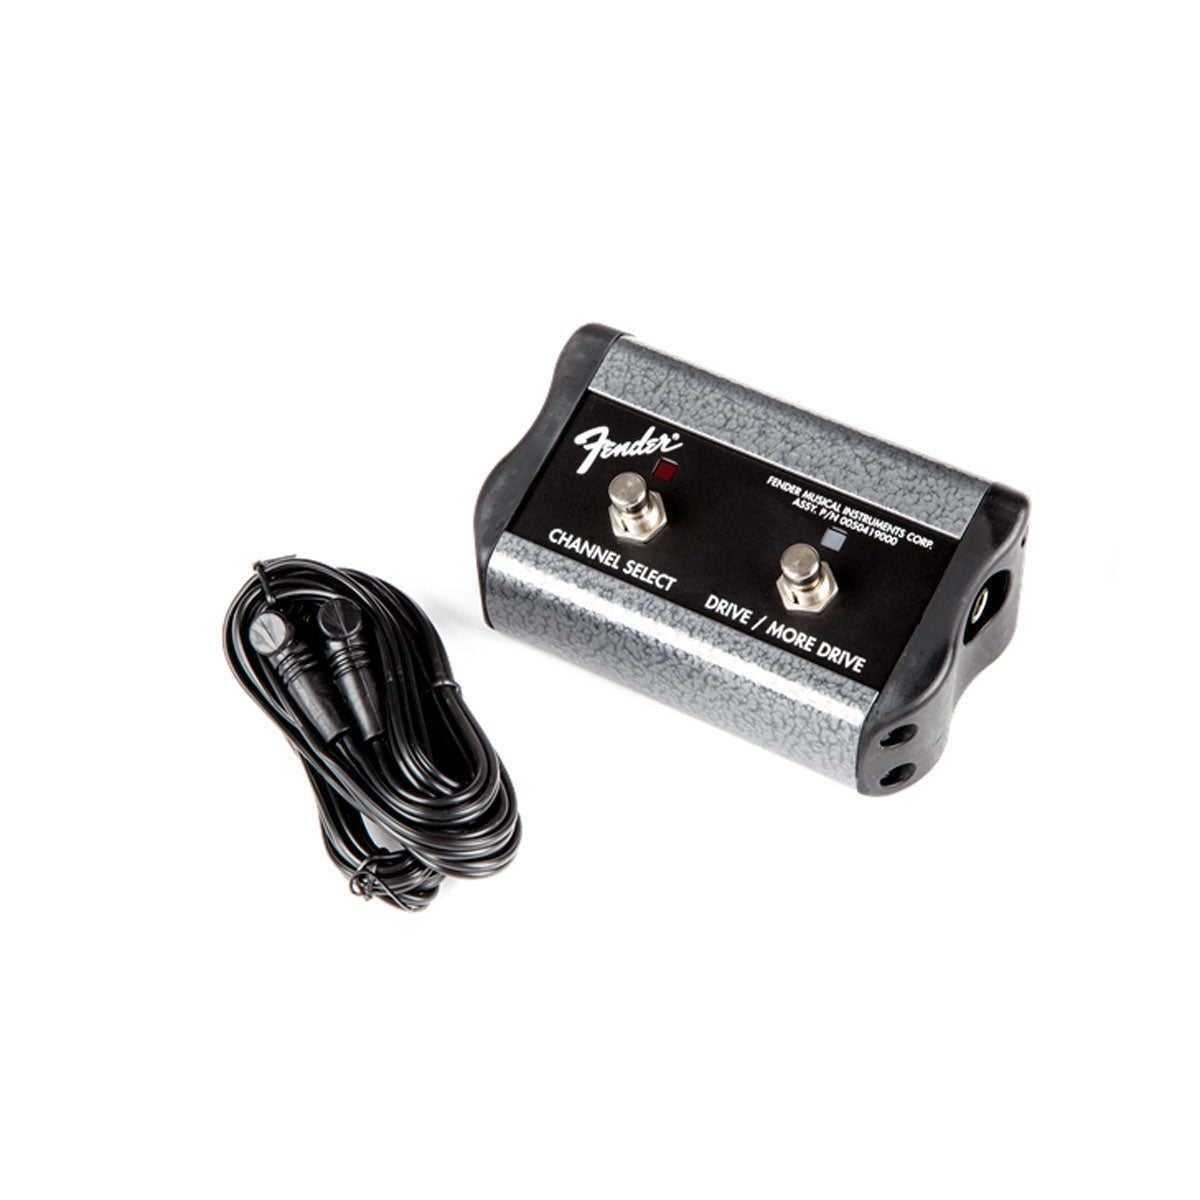 Pedal Fender Footswitch 2 Botones Channel / Gain / More Gain 0994062000